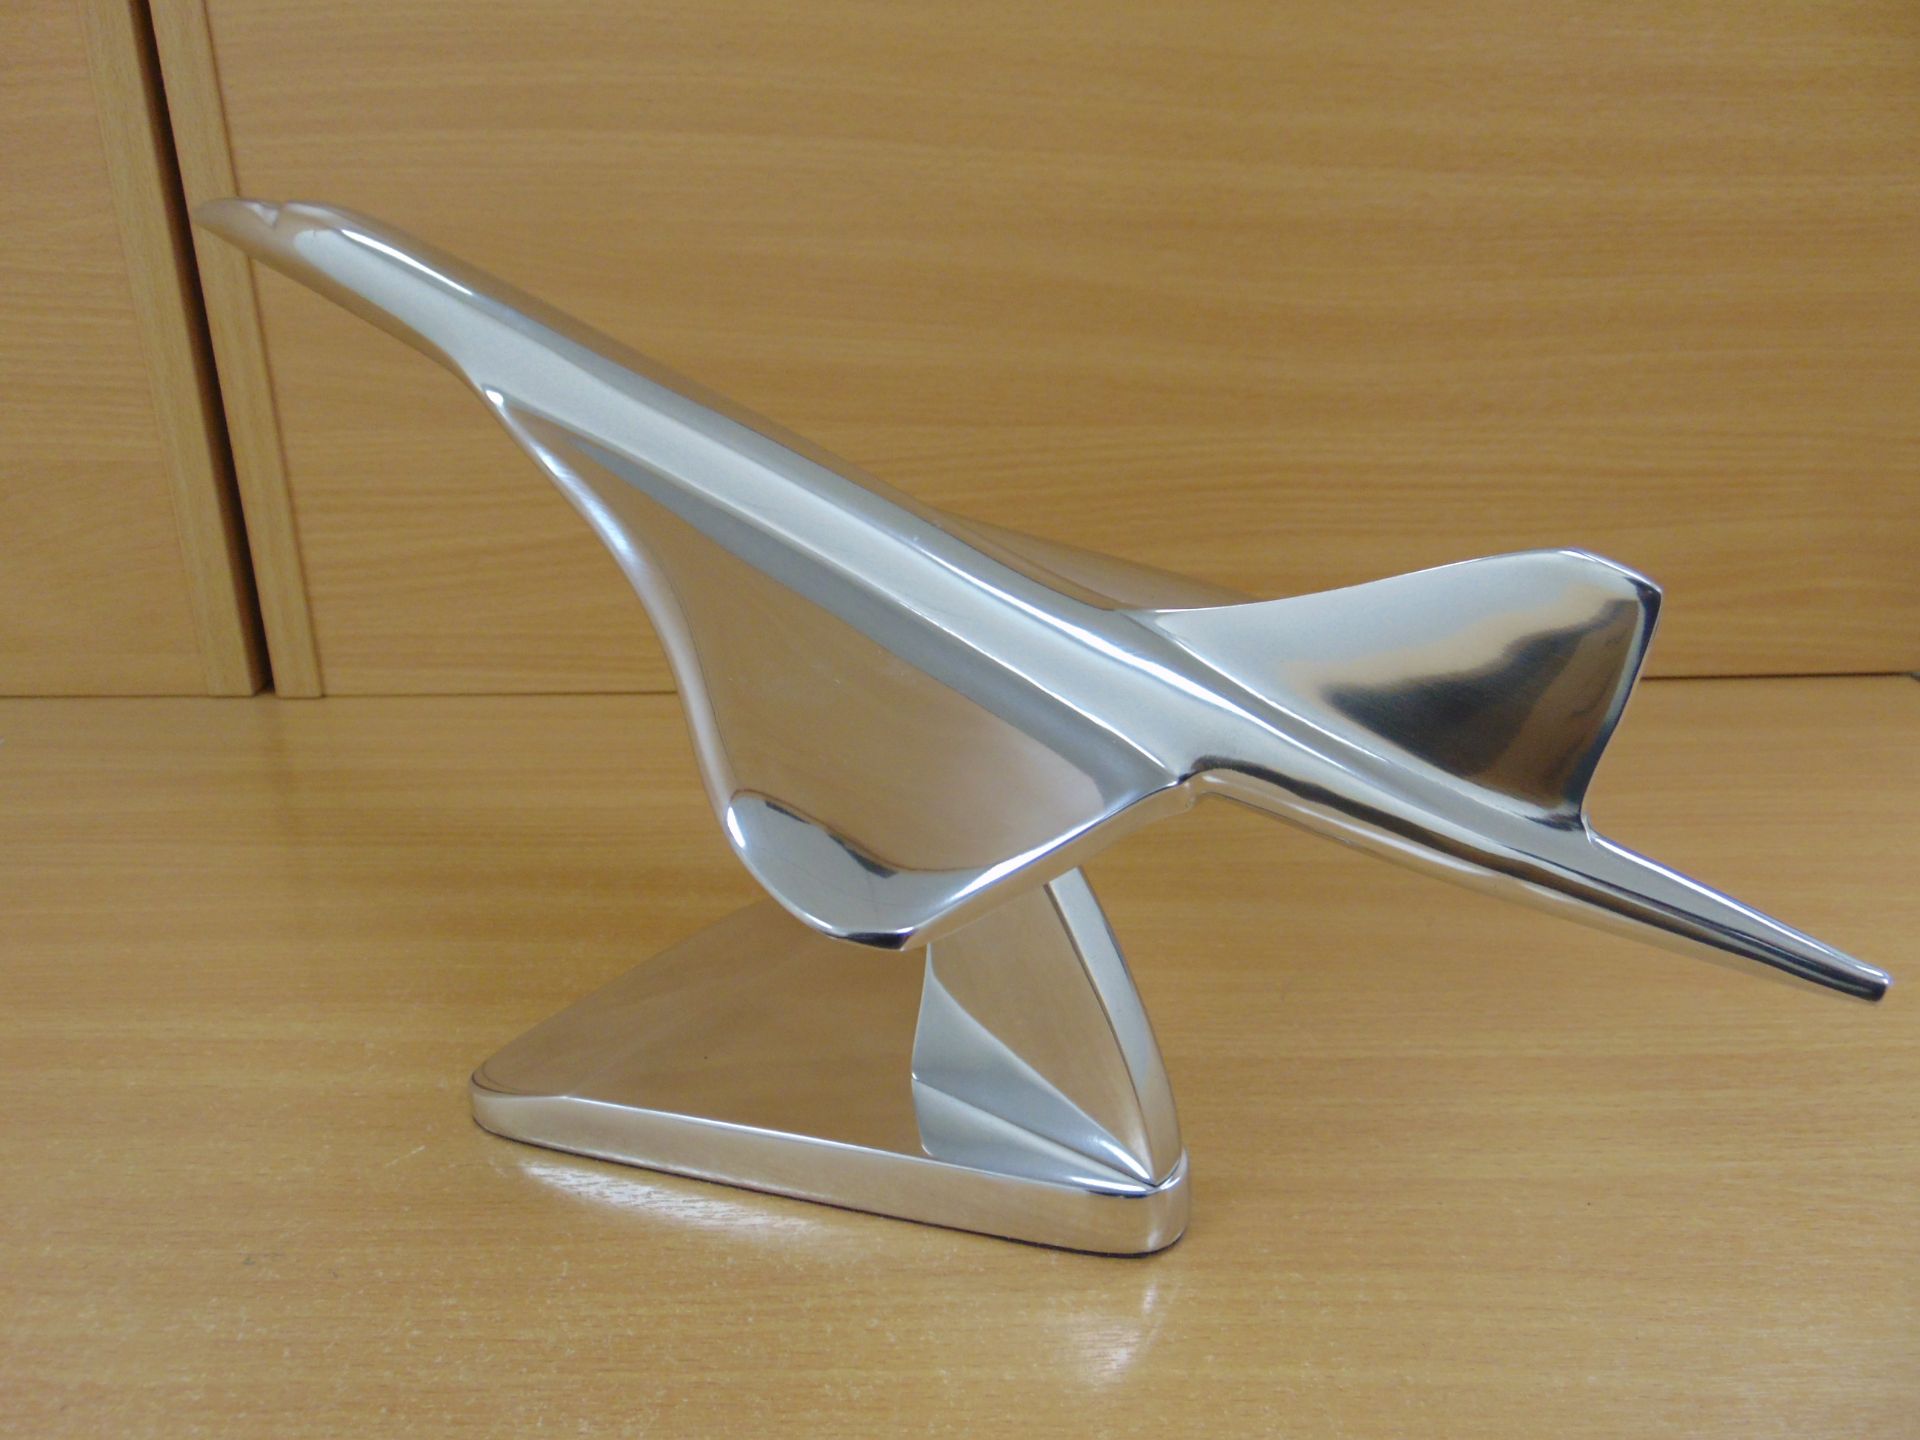 STUNNING POLISHED ALLUMINUM DESK TOP MODEL OF A CONCORD IN FLIGHT ON STAND - Image 5 of 12